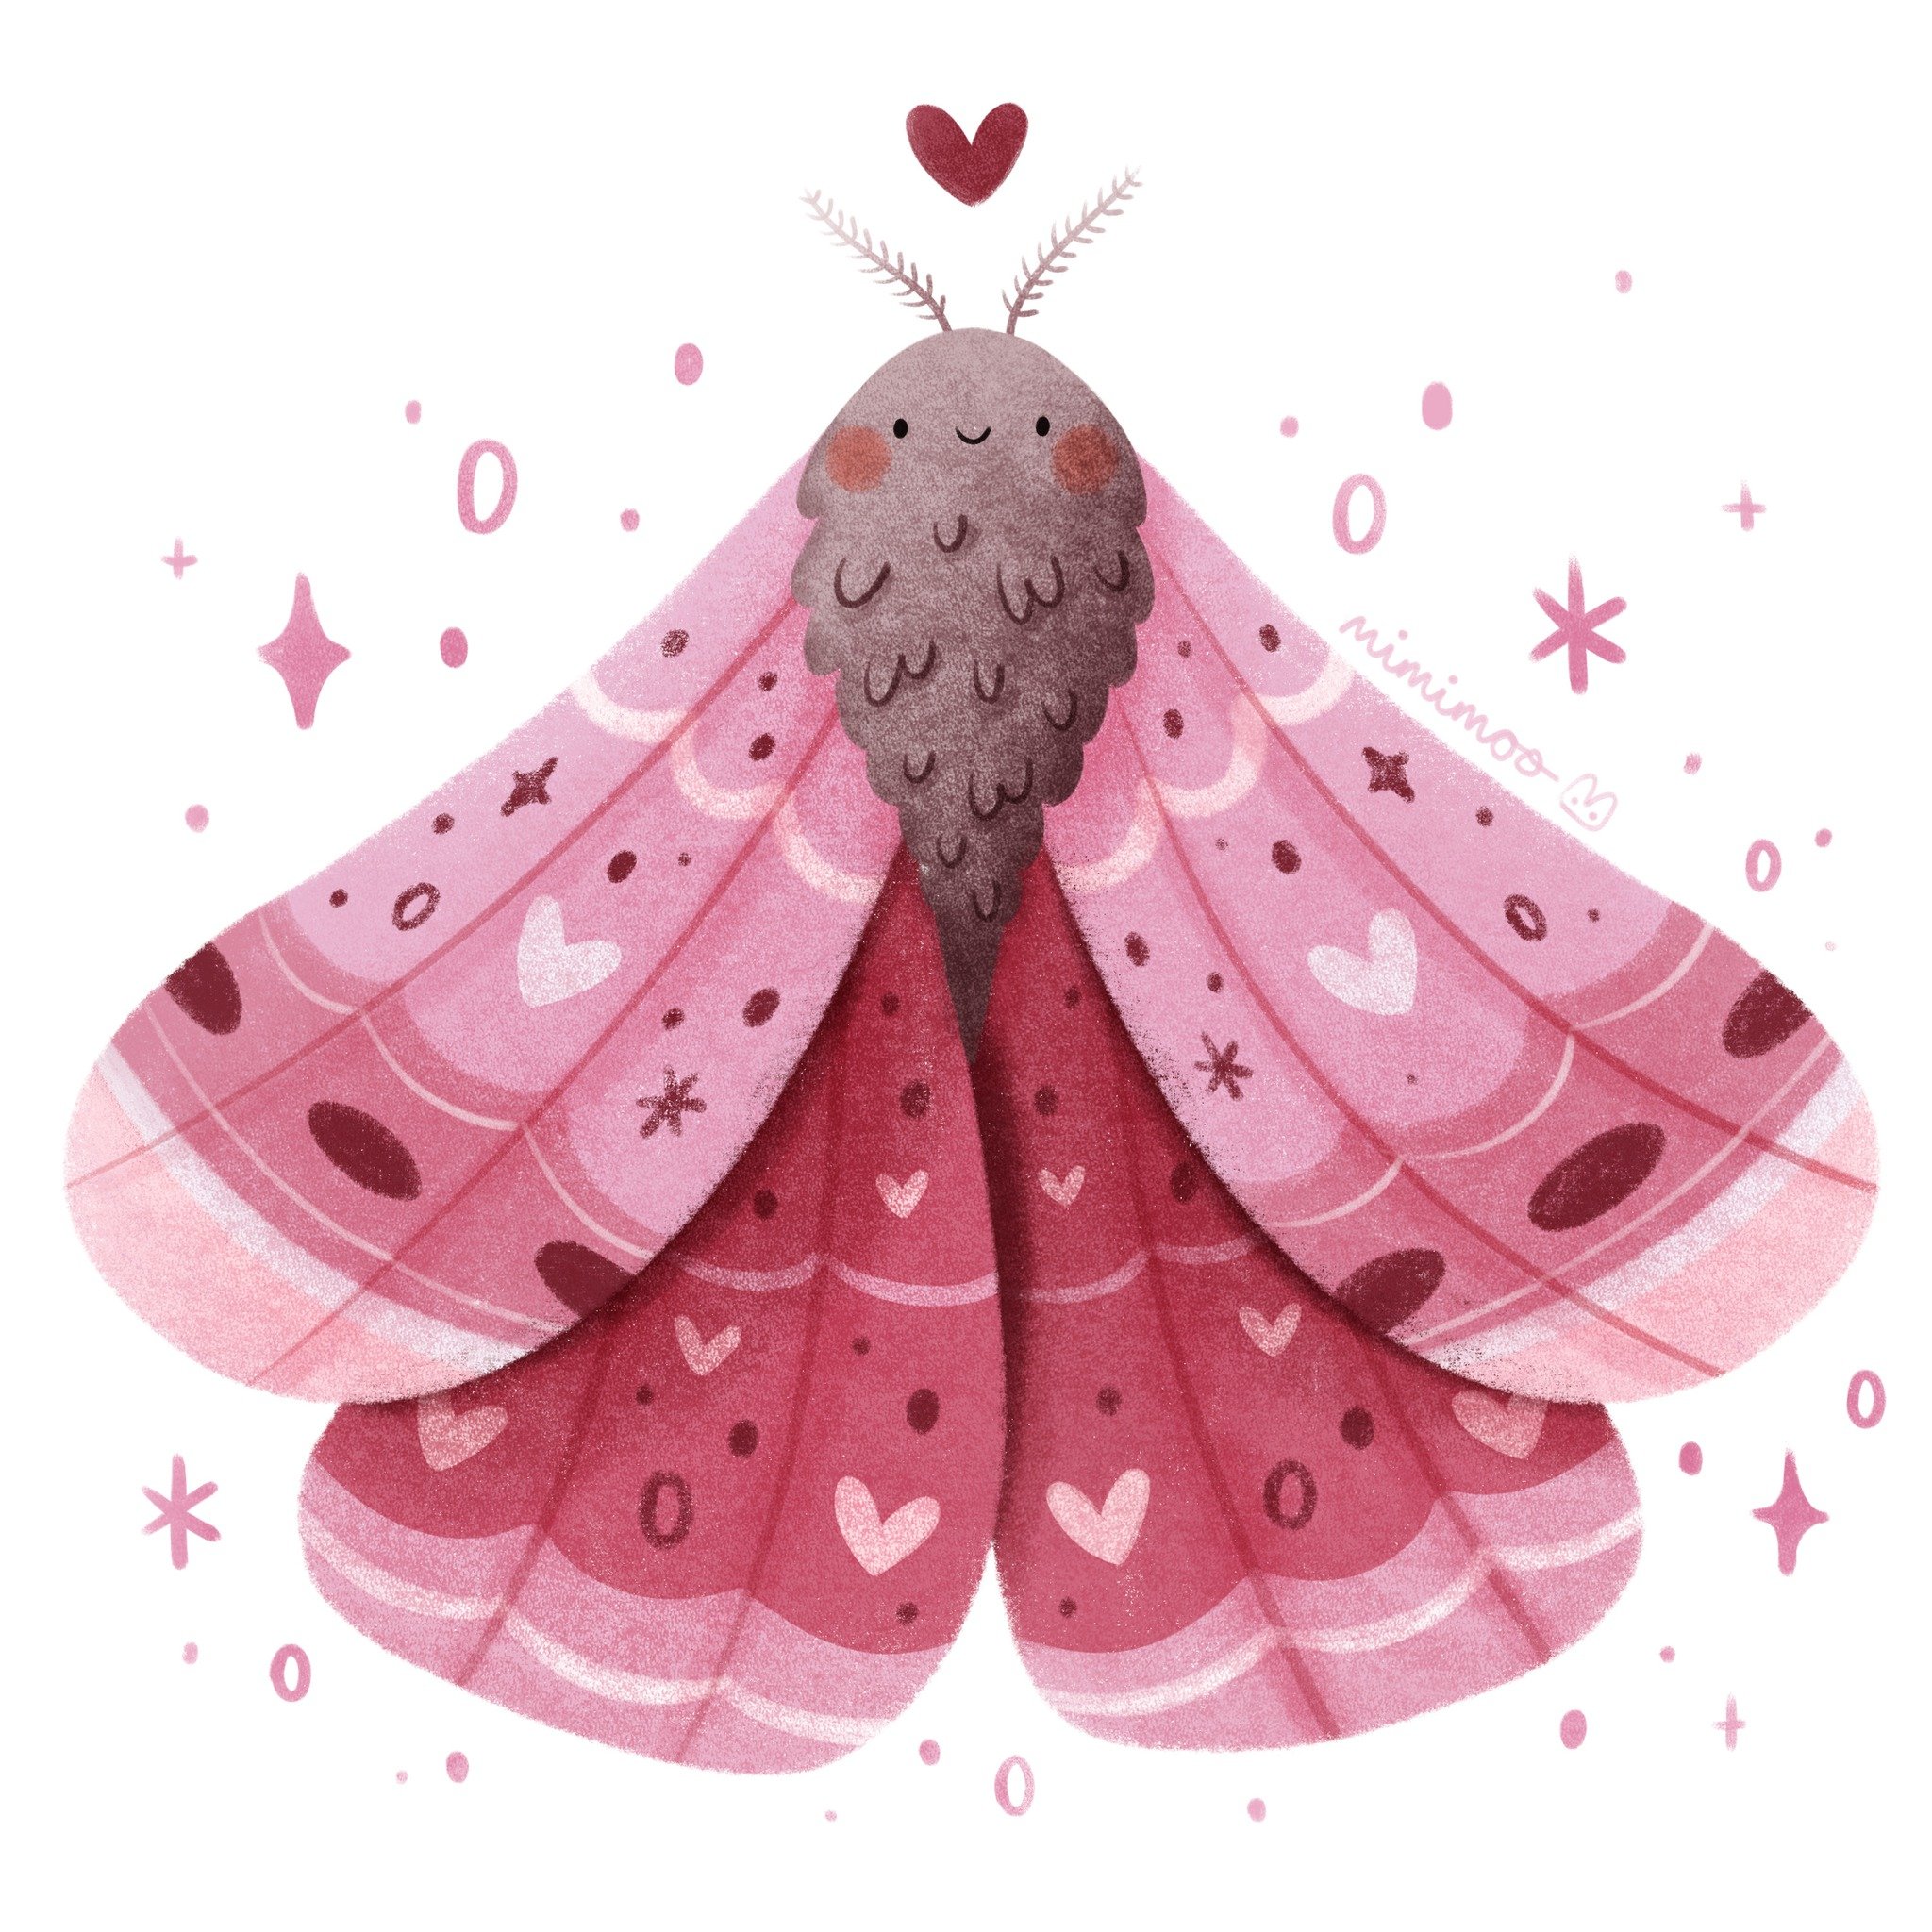 Big cutie moth wearing her best colours today!

Brushes I used (from my brush packs):
🌷 Mimi Simple Sketching for initial sketch
🌷 Mimi Soft Sketchy Texture and Marker Pen for colouring shapes
🌷 Mimi Textured Pencil Light, Soft Crayon, Medium Cray